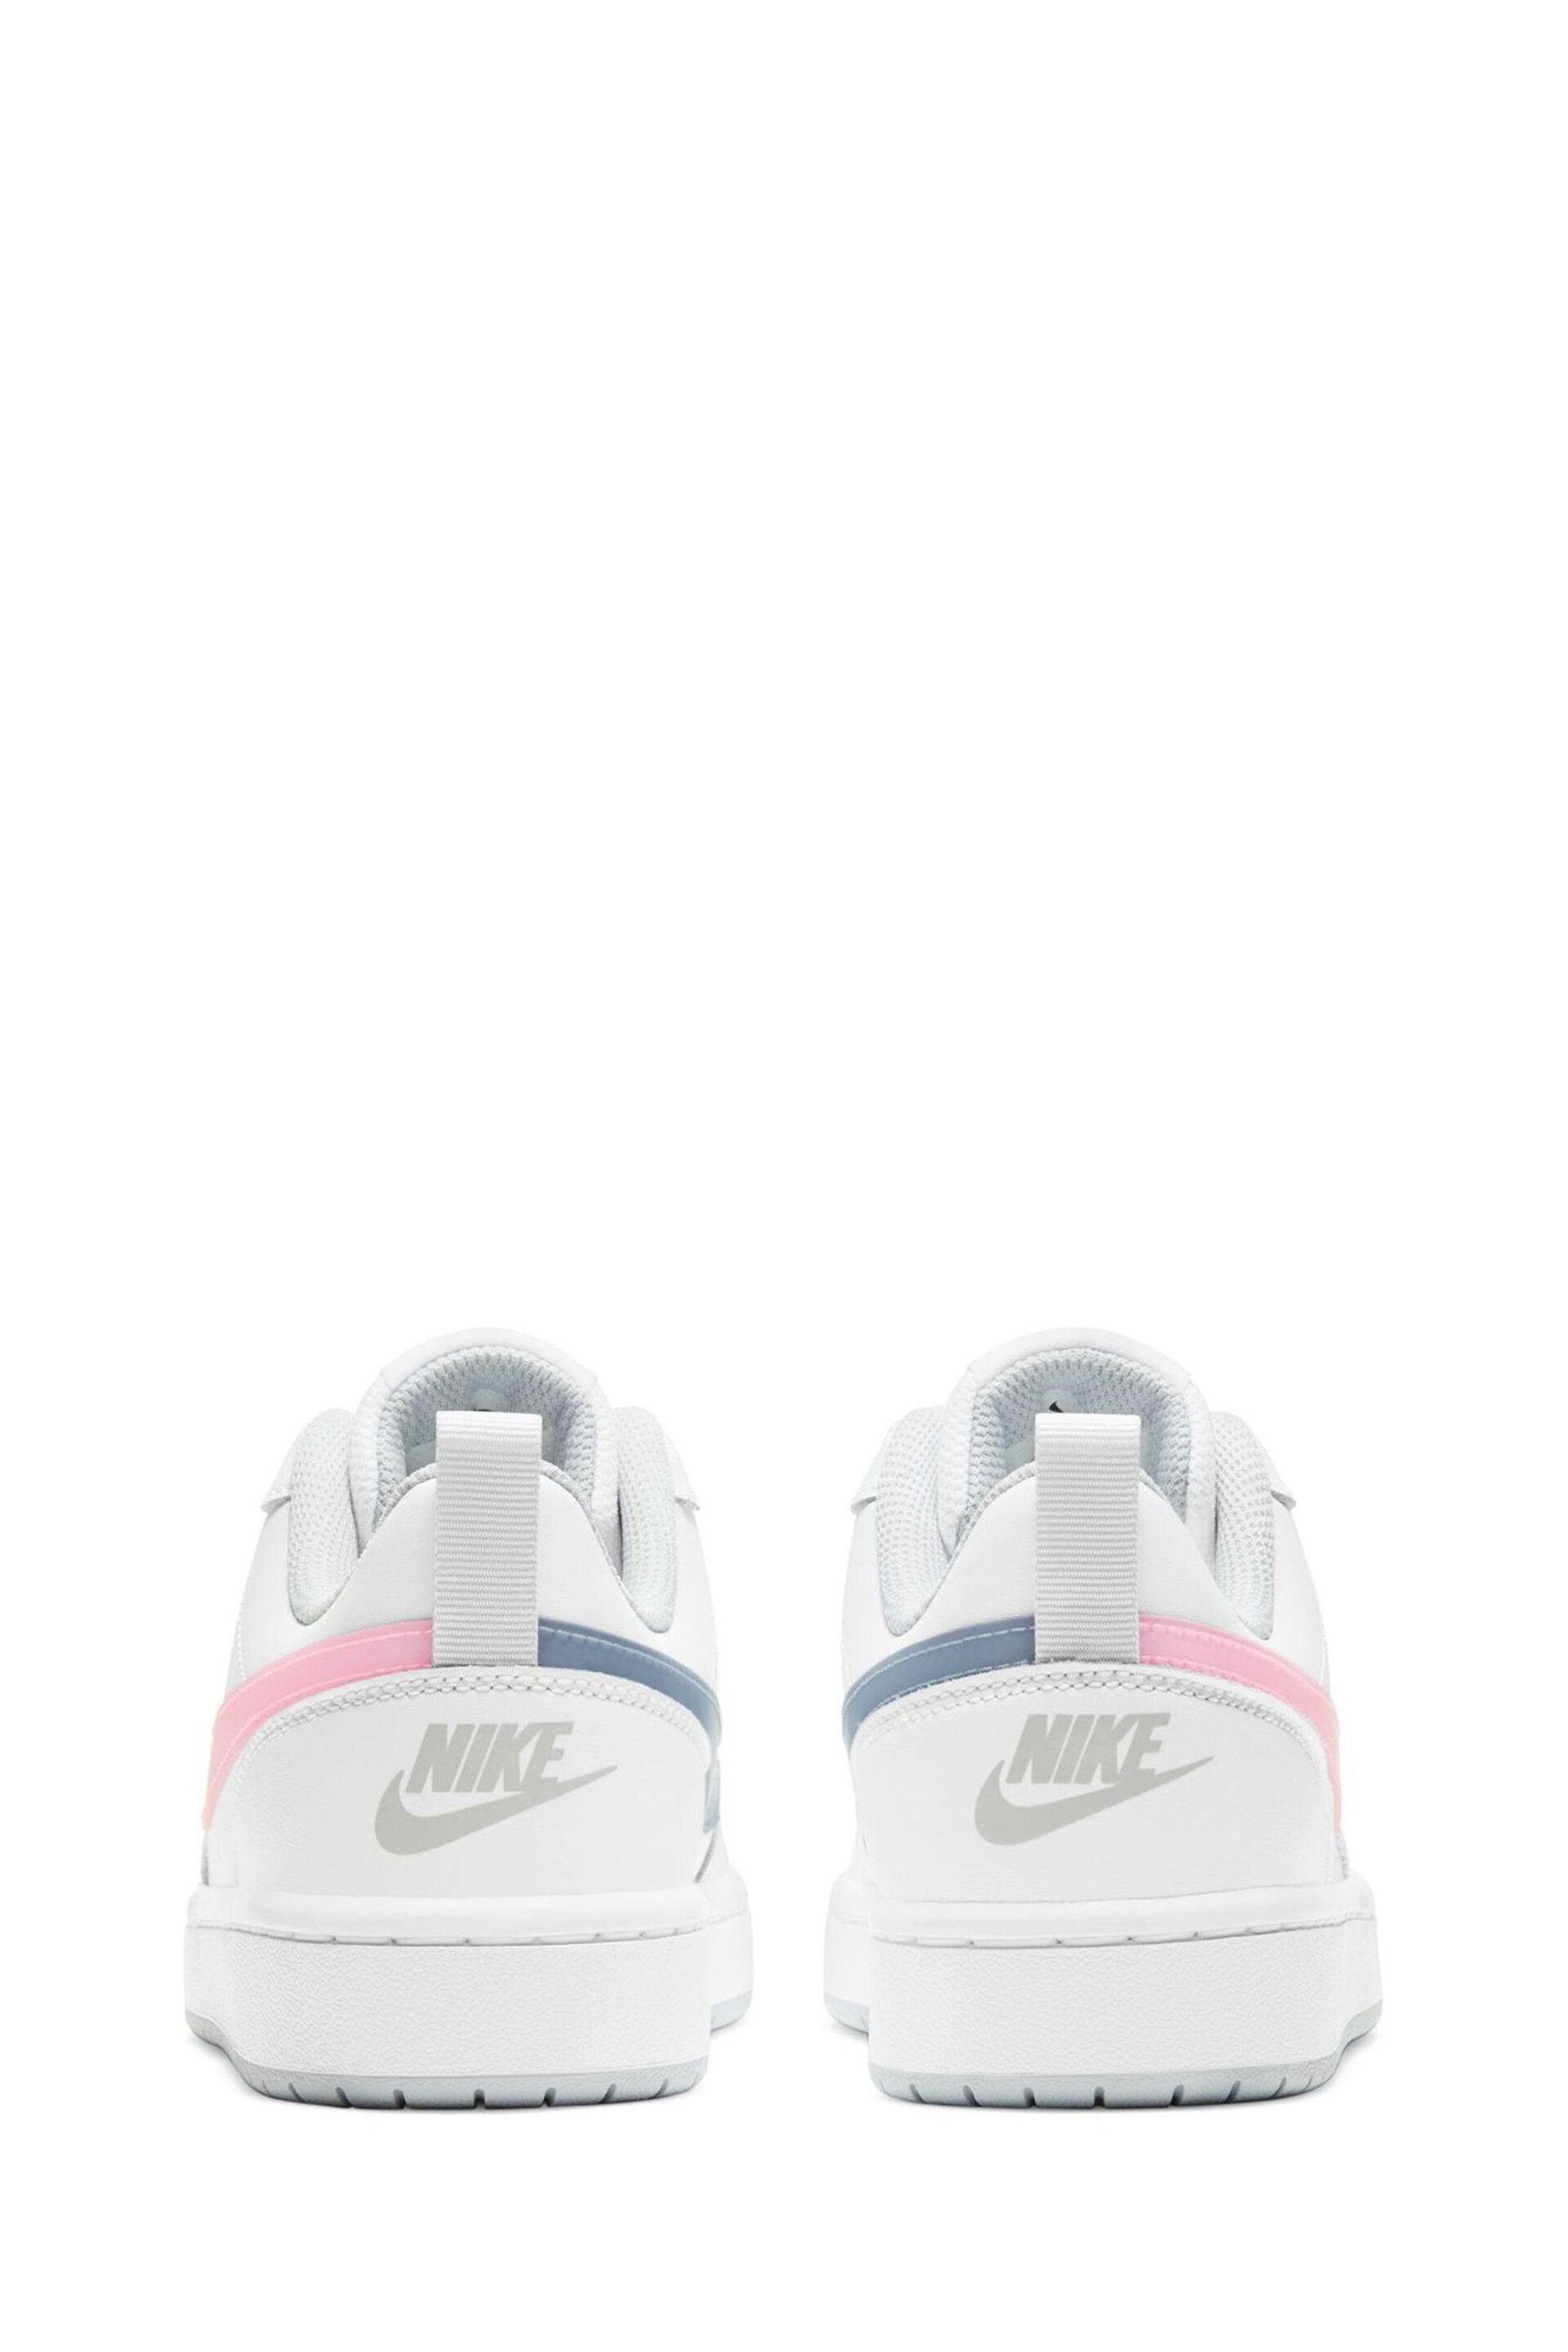 Nike White/Pink Court Borough Low Youth Trainers - Image 6 of 8